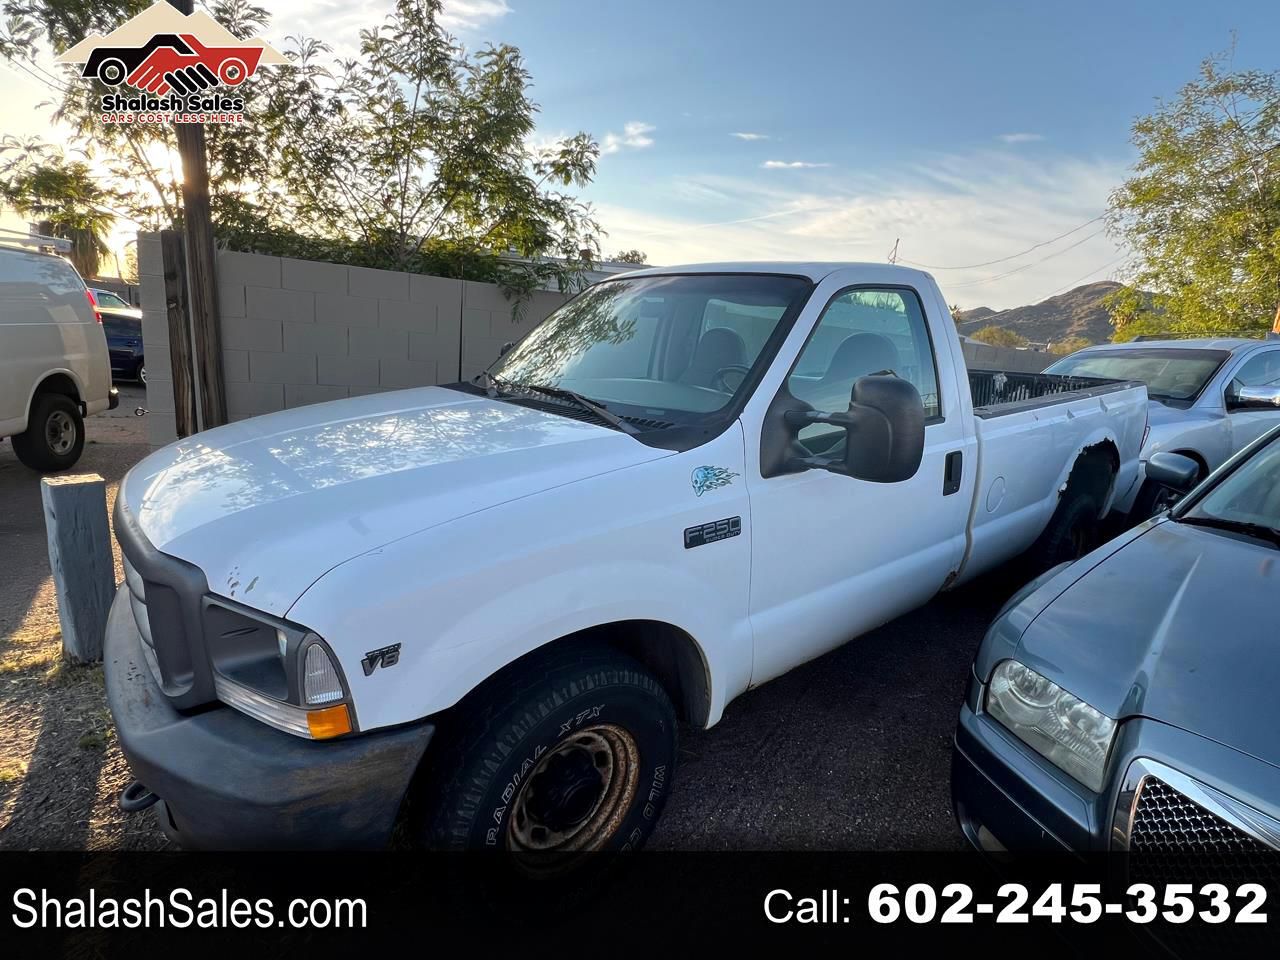 2002 Ford F-250 SD